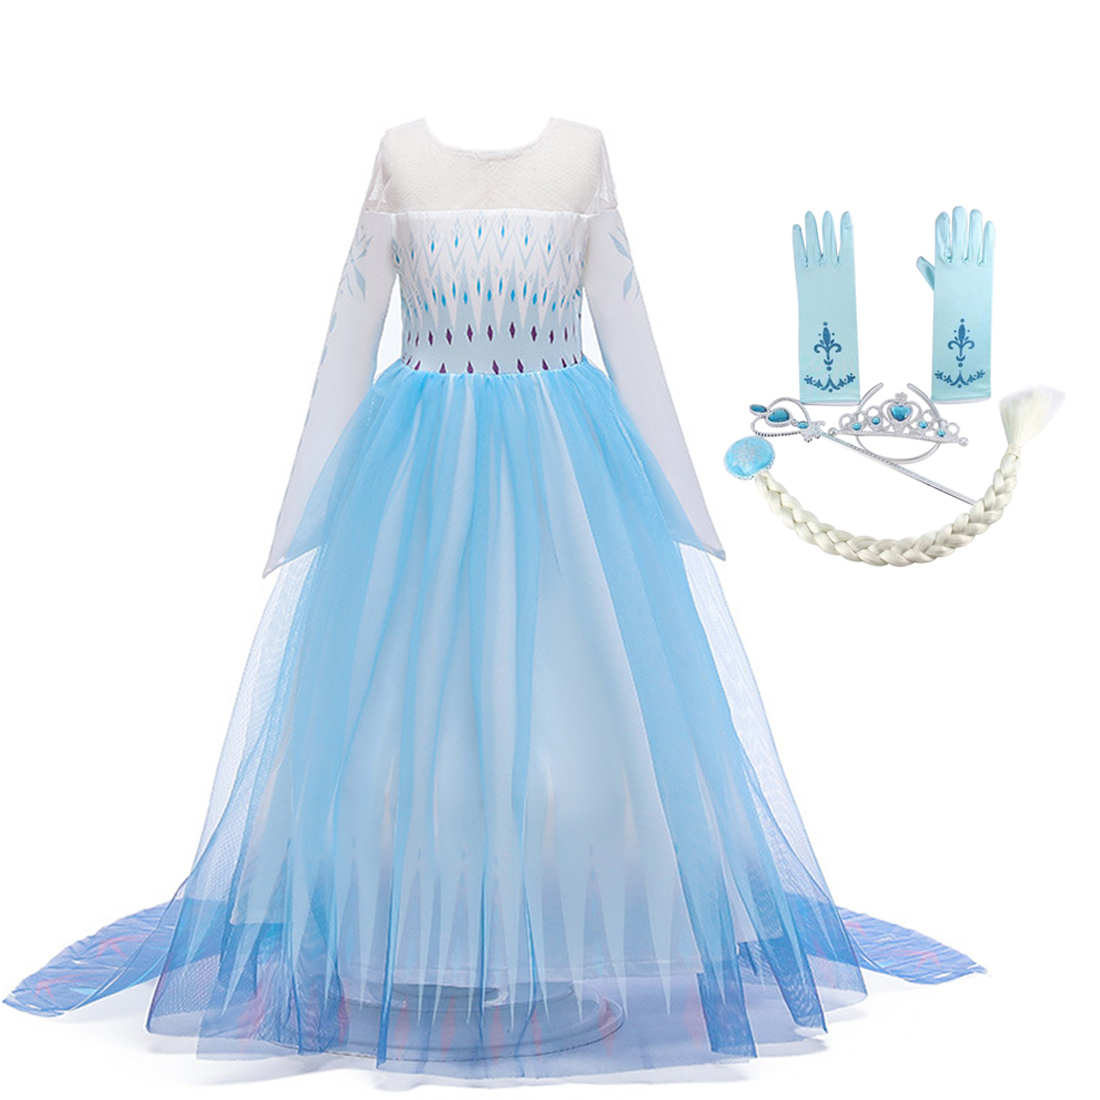 Light blue and accessories